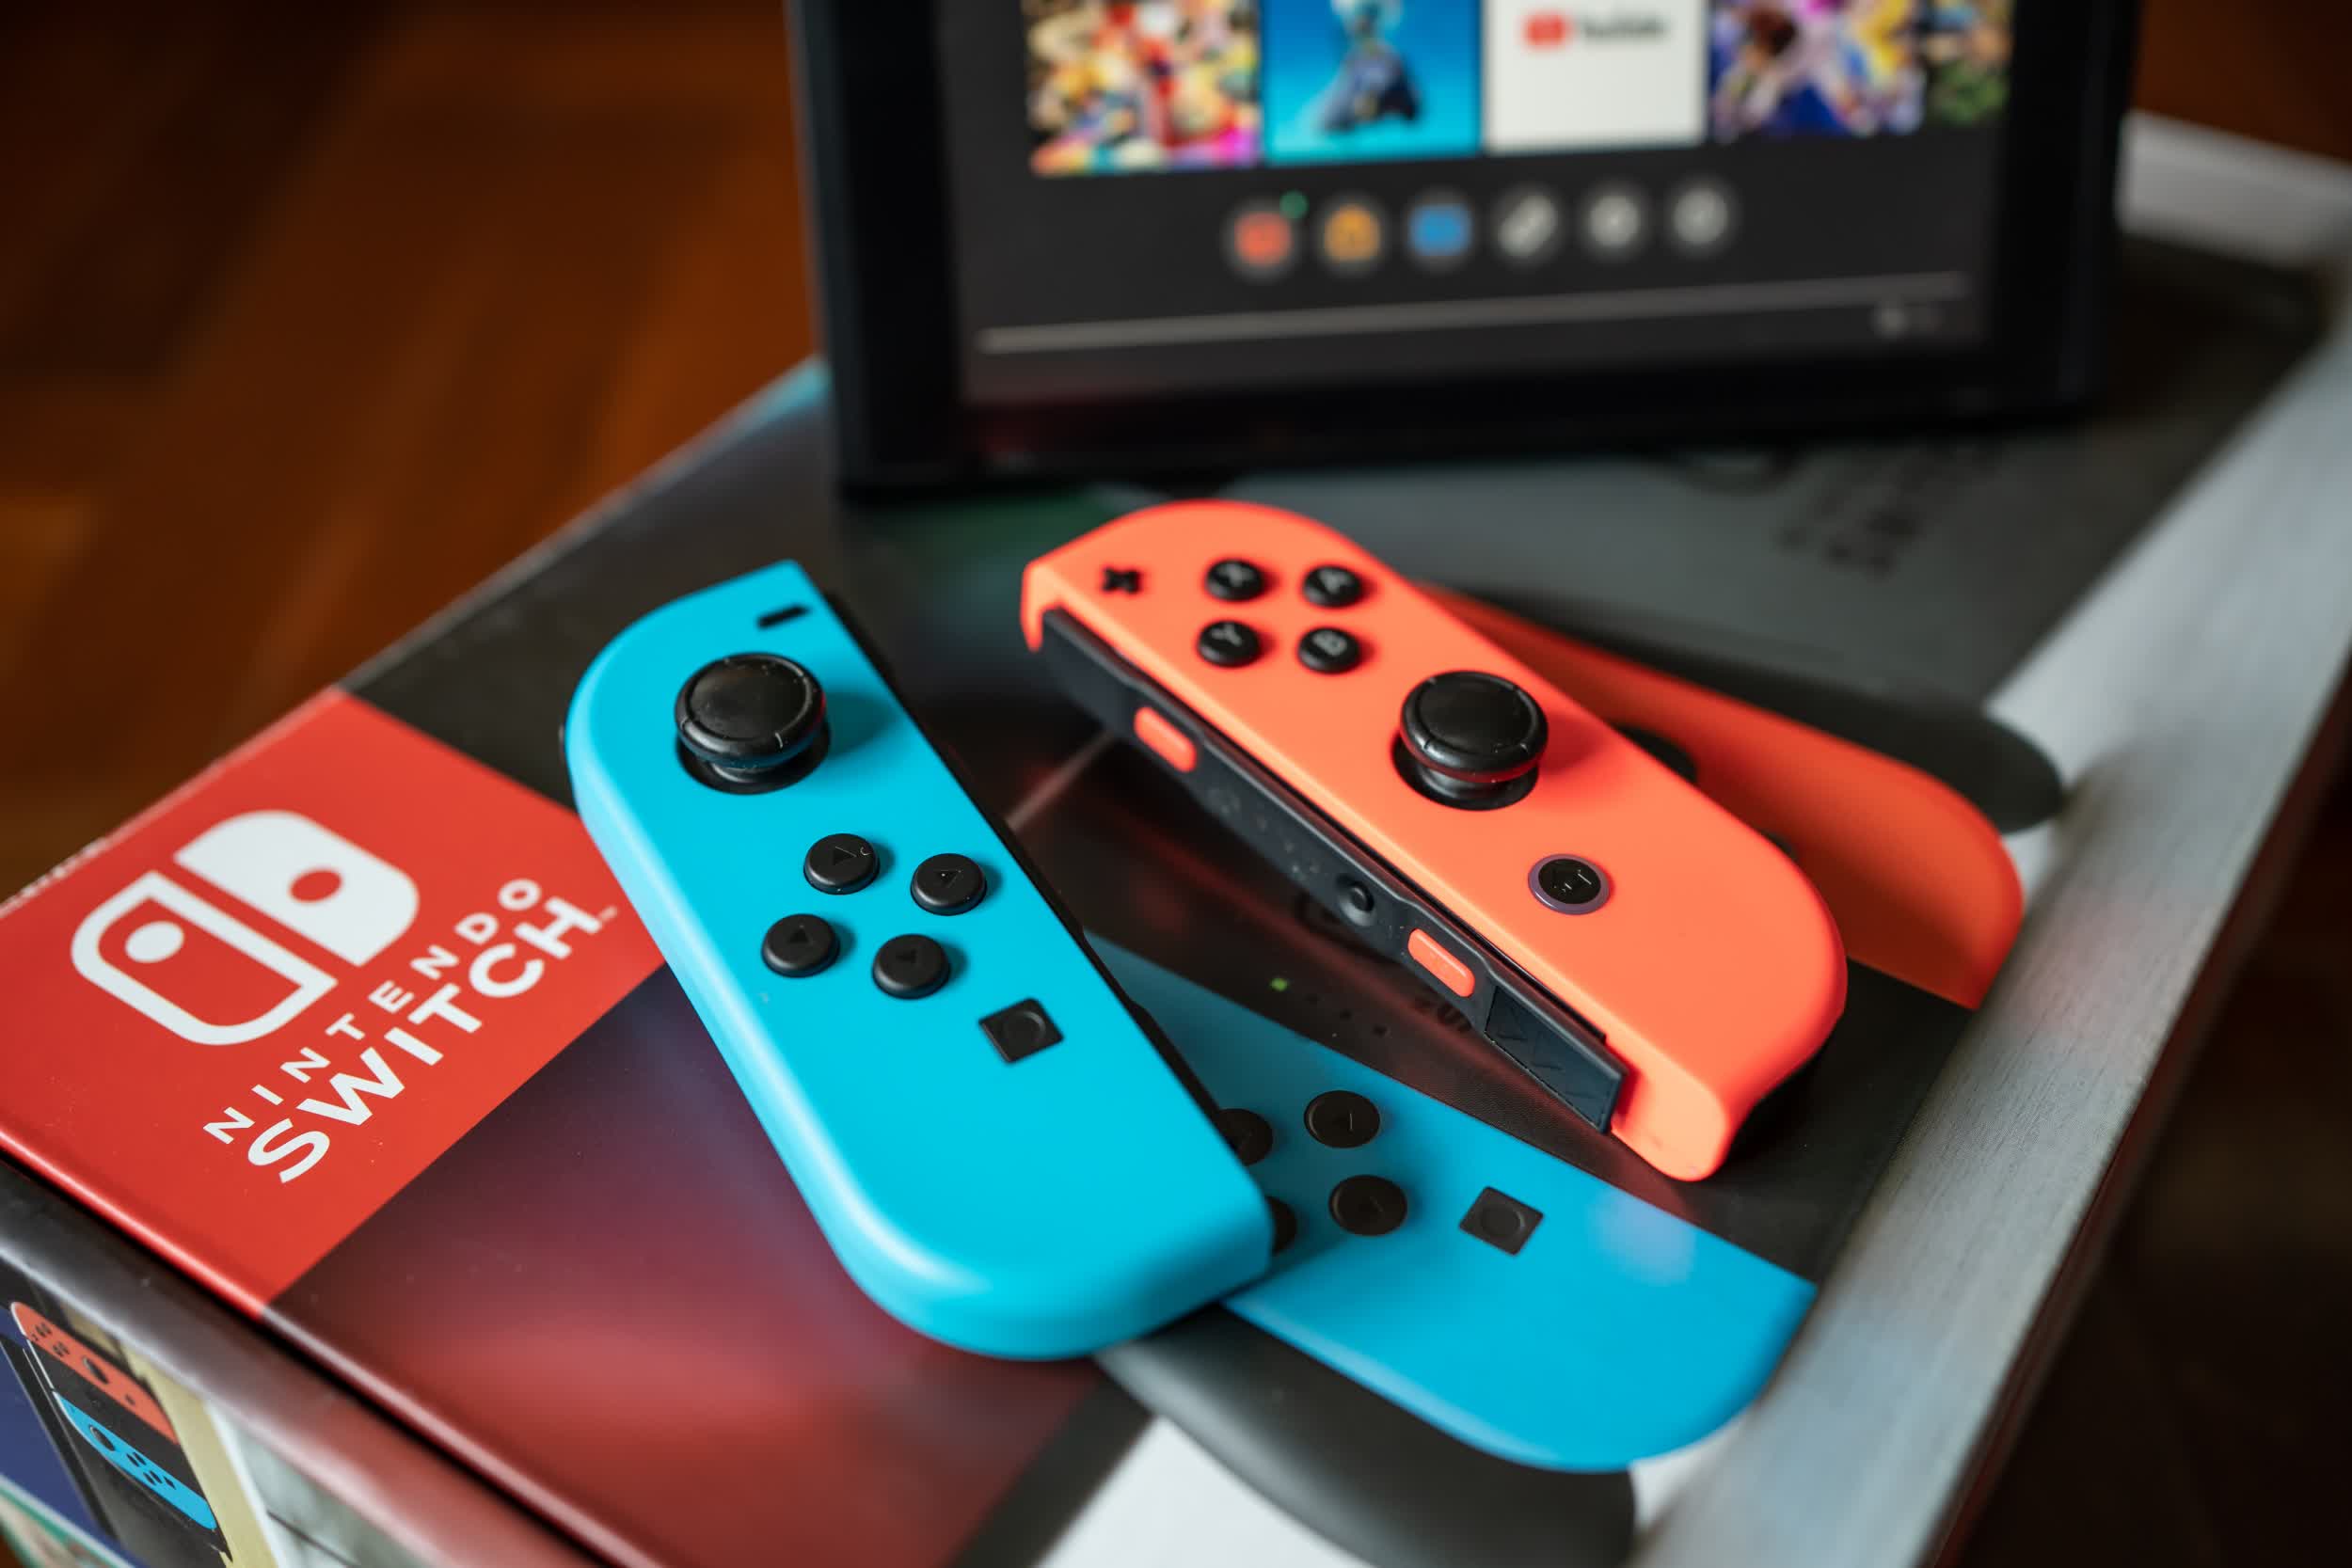 Activision was told last year that the Nintendo Switch 2 would have PS4-like performance